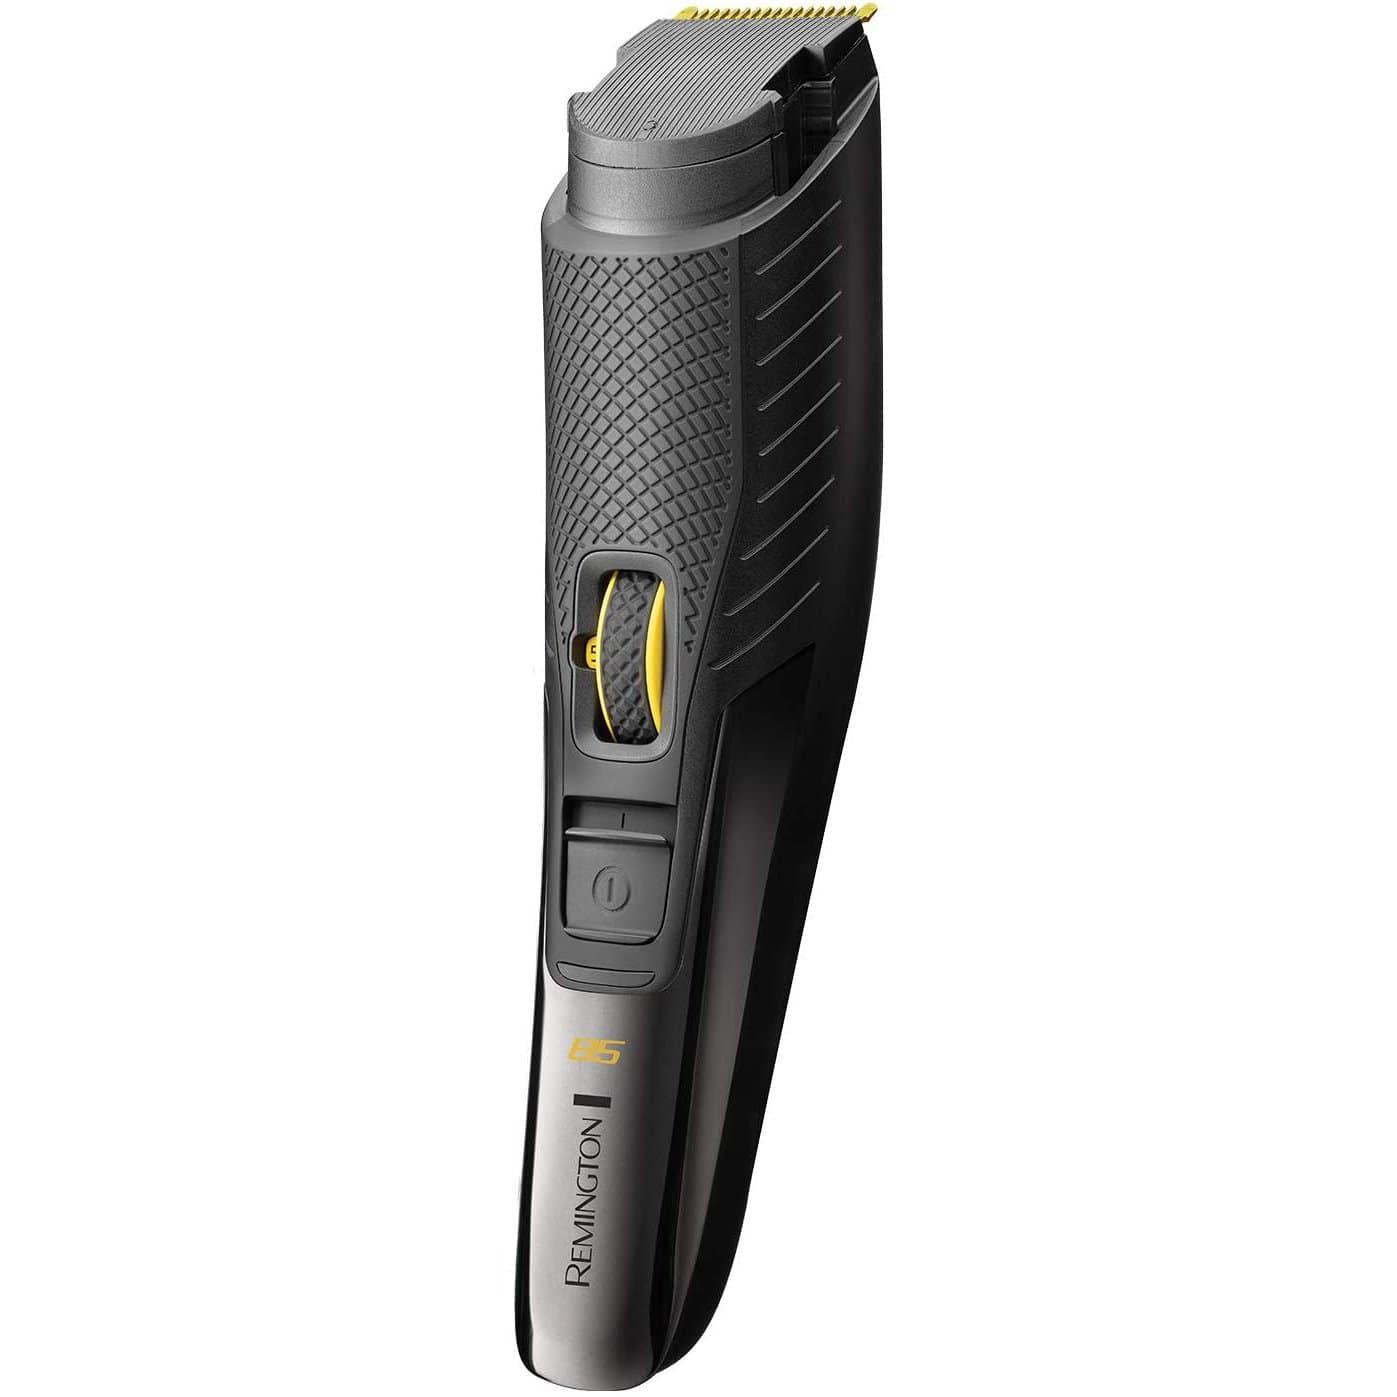 Remington B5 Style Series Beard Trimmer, Comfort Tip Blades, Corded/Cordless Use -MB5000 - Healthxpress.ie